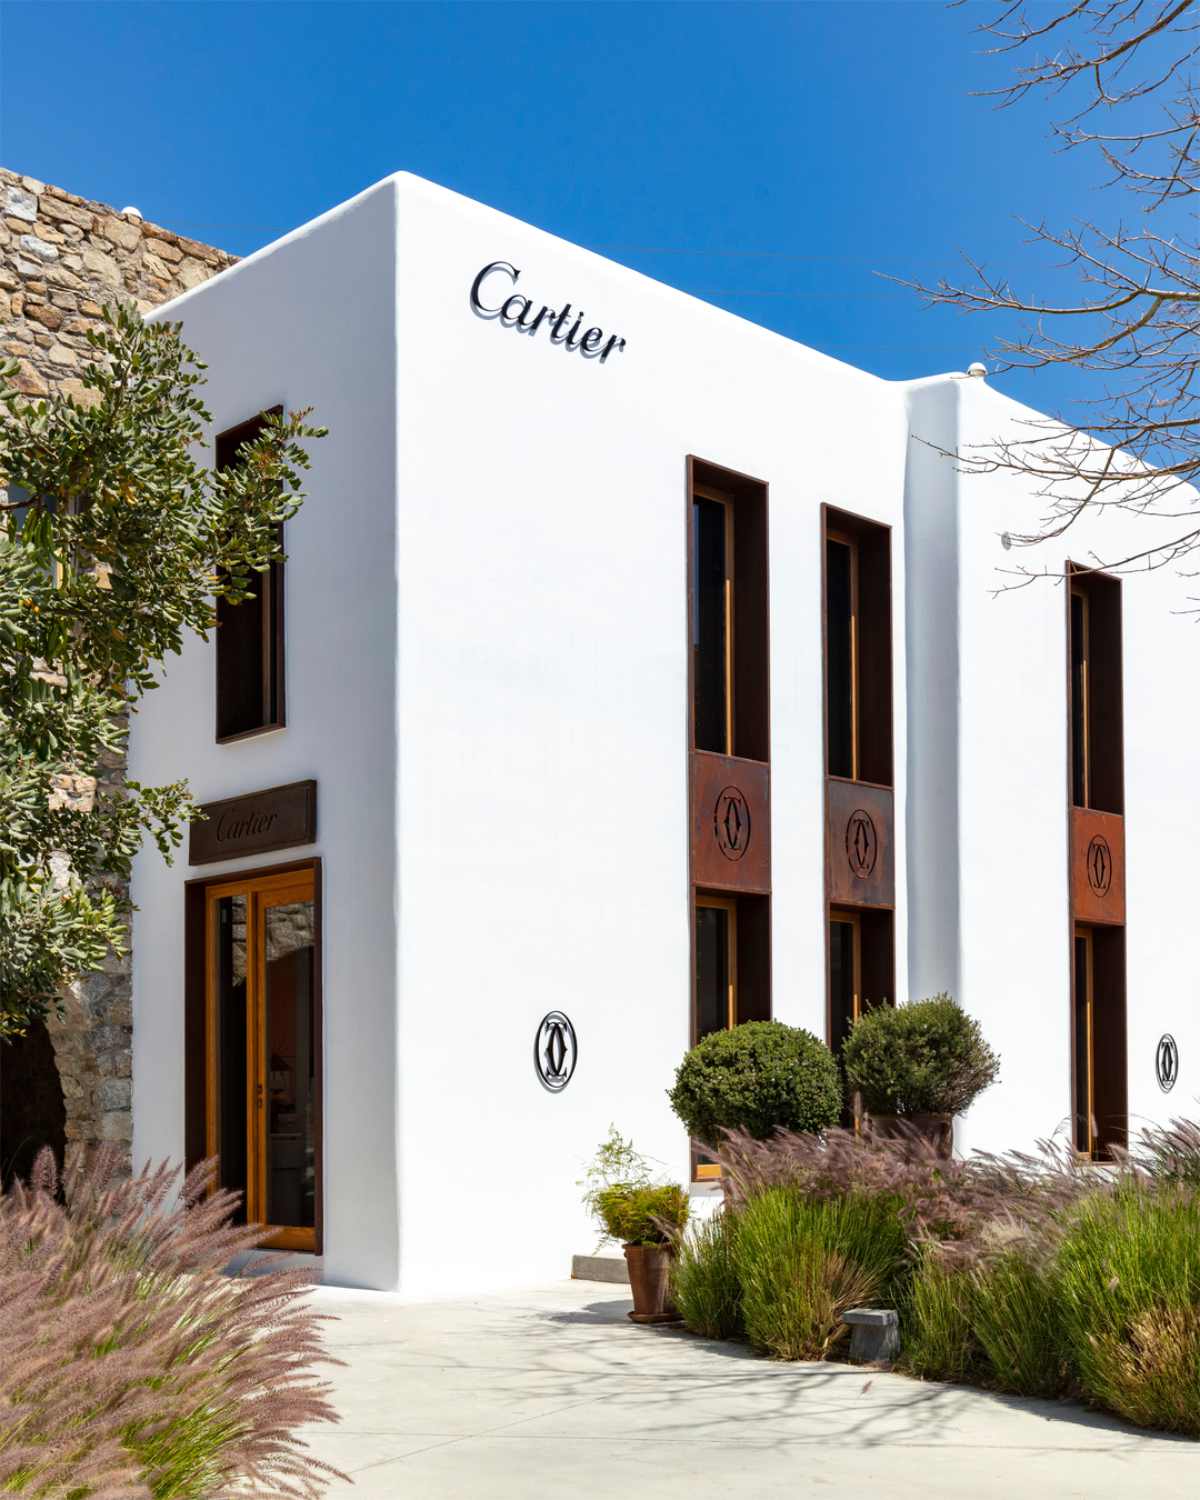 Cartier Arrives for Summer in the Hamptons